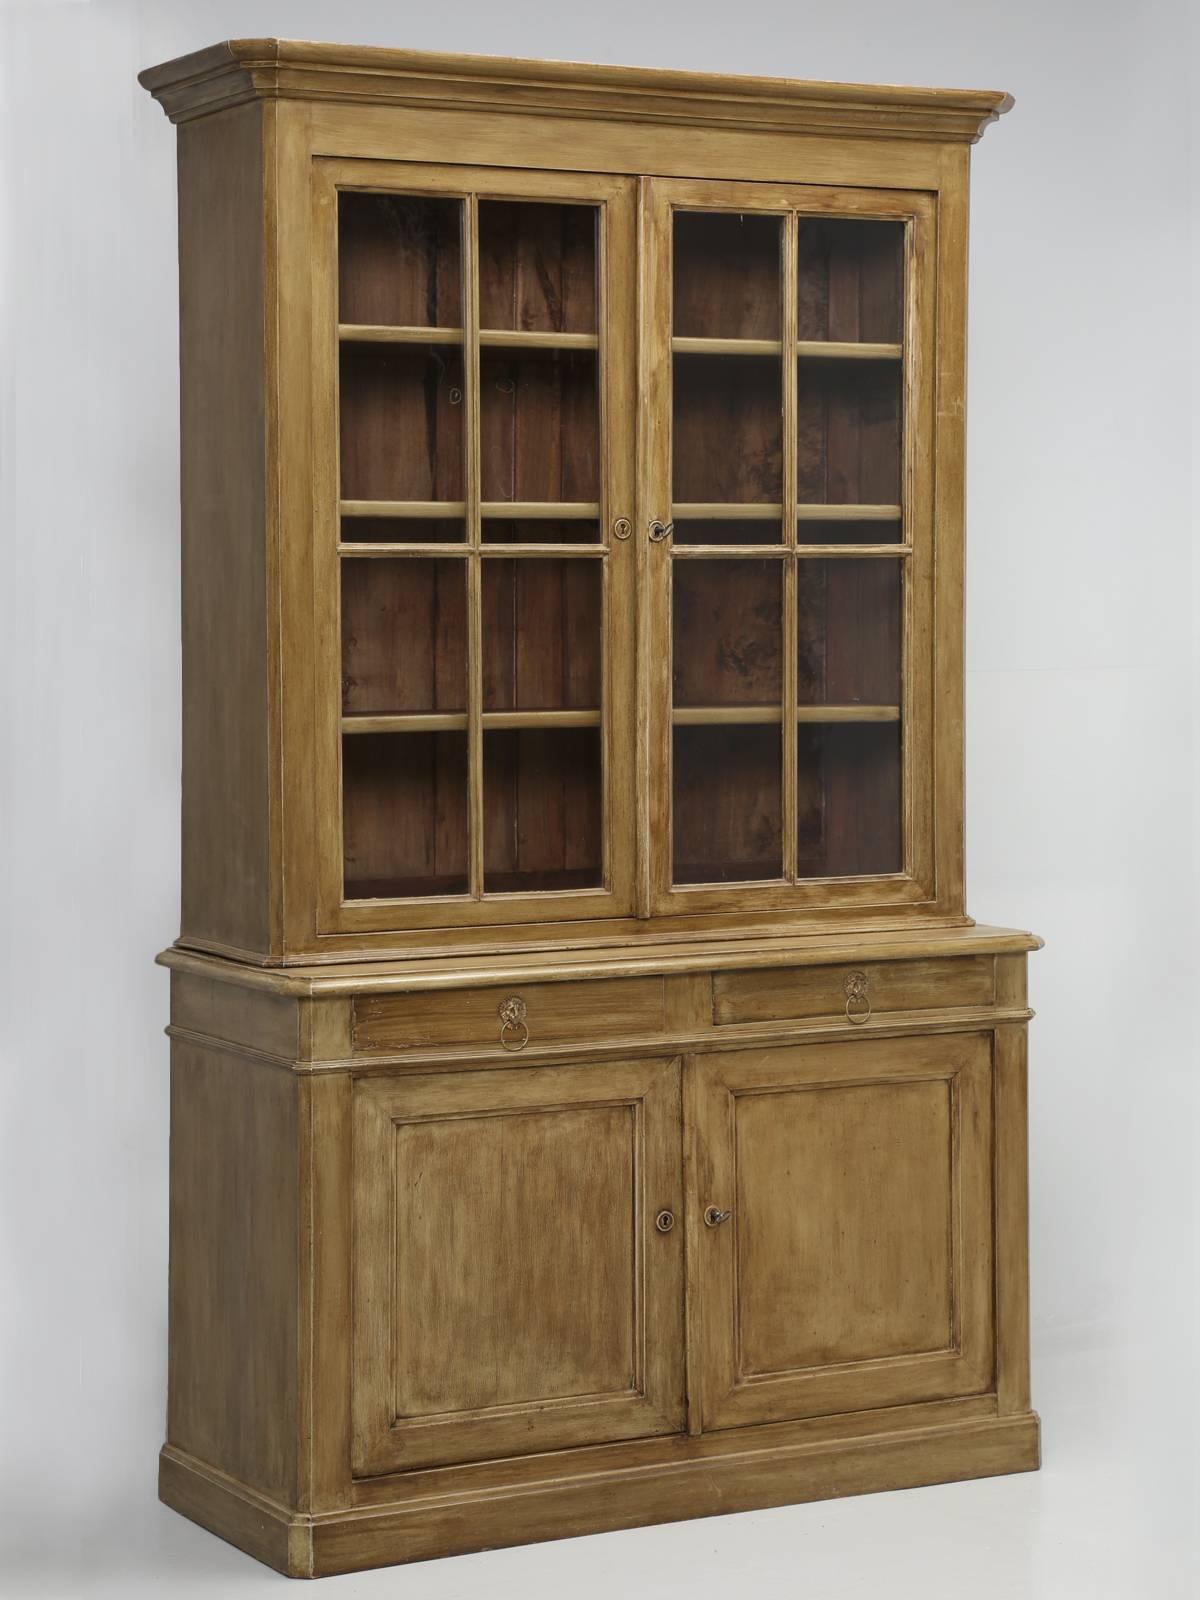 Antique French China cabinet from Bordeaux, in the most unusual and beautiful painted finish. This antique French china cabinet had a painted finish, done in a bit of faux grain look, but not what you would normally see. The paint looks old and